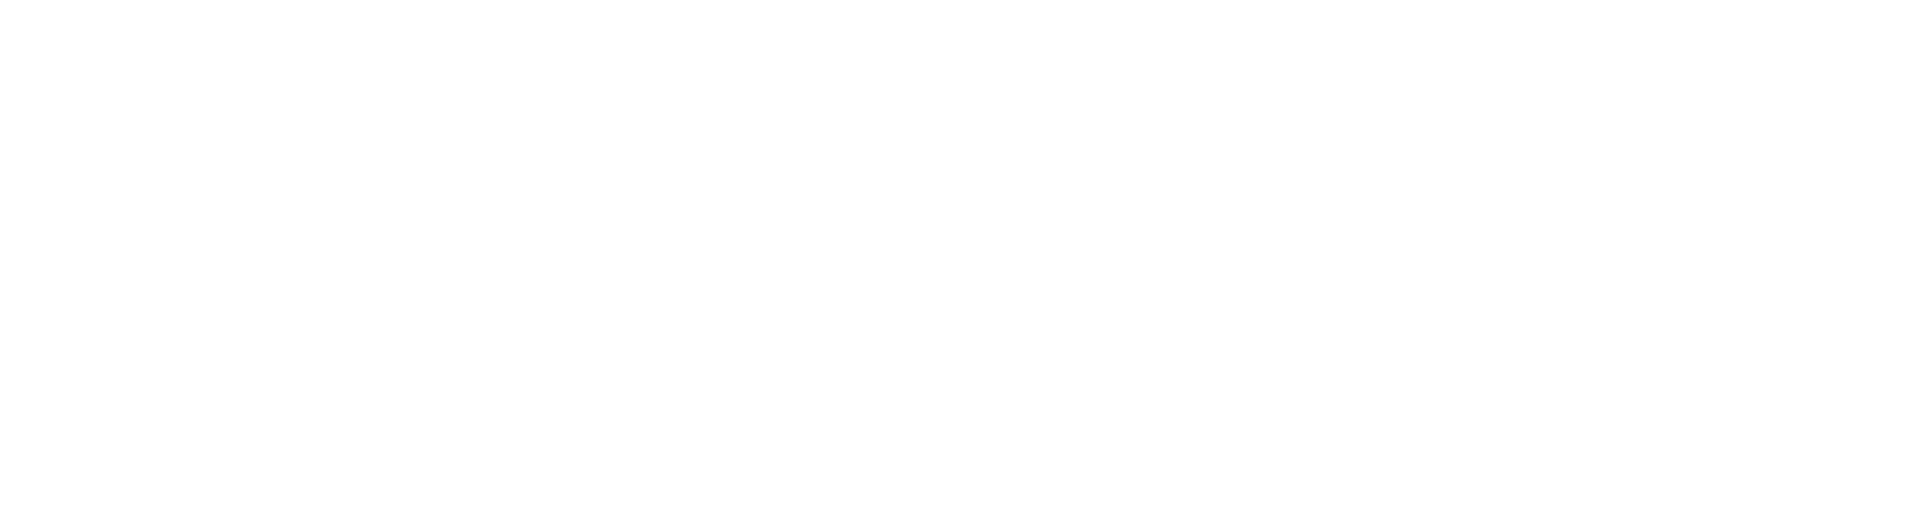 Onlinetire Outlet